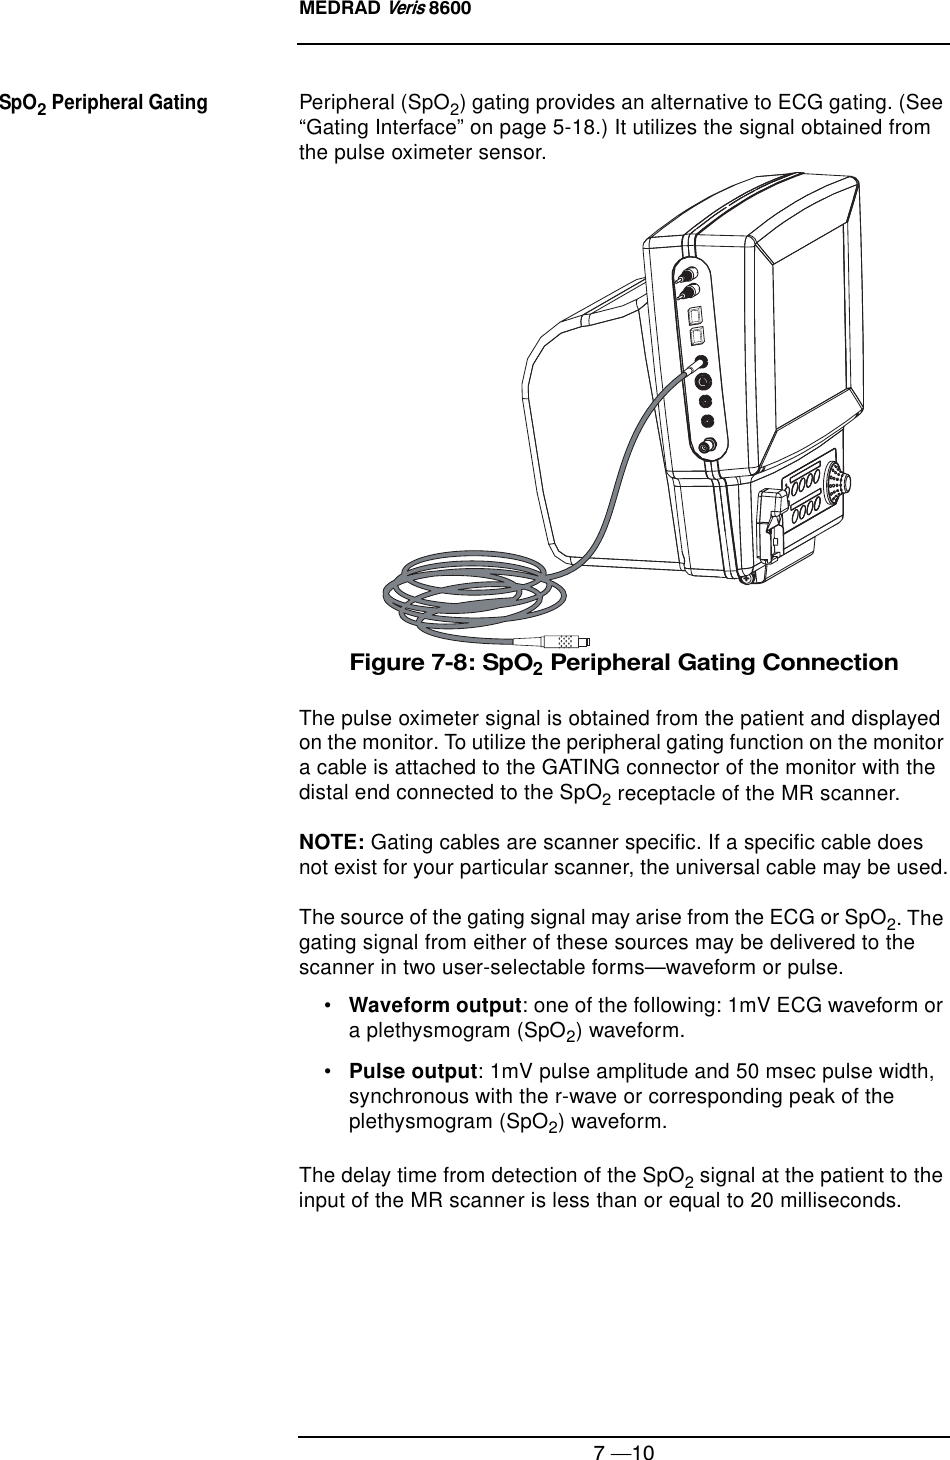 MEDRAD Veris 86007 —10SpO2 Peripheral GatingPeripheral (SpO2) gating provides an alternative to ECG gating. (See “Gating Interface” on page 5-18.) It utilizes the signal obtained from the pulse oximeter sensor.Figure 7-8: SpO2 Peripheral Gating ConnectionThe pulse oximeter signal is obtained from the patient and displayed on the monitor. To utilize the peripheral gating function on the monitor a cable is attached to the GATING connector of the monitor with the distal end connected to the SpO2 receptacle of the MR scanner.NOTE: Gating cables are scanner specific. If a specific cable does not exist for your particular scanner, the universal cable may be used.The source of the gating signal may arise from the ECG or SpO2. The gating signal from either of these sources may be delivered to the scanner in two user-selectable forms—waveform or pulse.•Waveform output: one of the following: 1mV ECG waveform or a plethysmogram (SpO2) waveform.•Pulse output: 1mV pulse amplitude and 50 msec pulse width, synchronous with the r-wave or corresponding peak of the plethysmogram (SpO2) waveform.The delay time from detection of the SpO2 signal at the patient to the input of the MR scanner is less than or equal to 20 milliseconds.